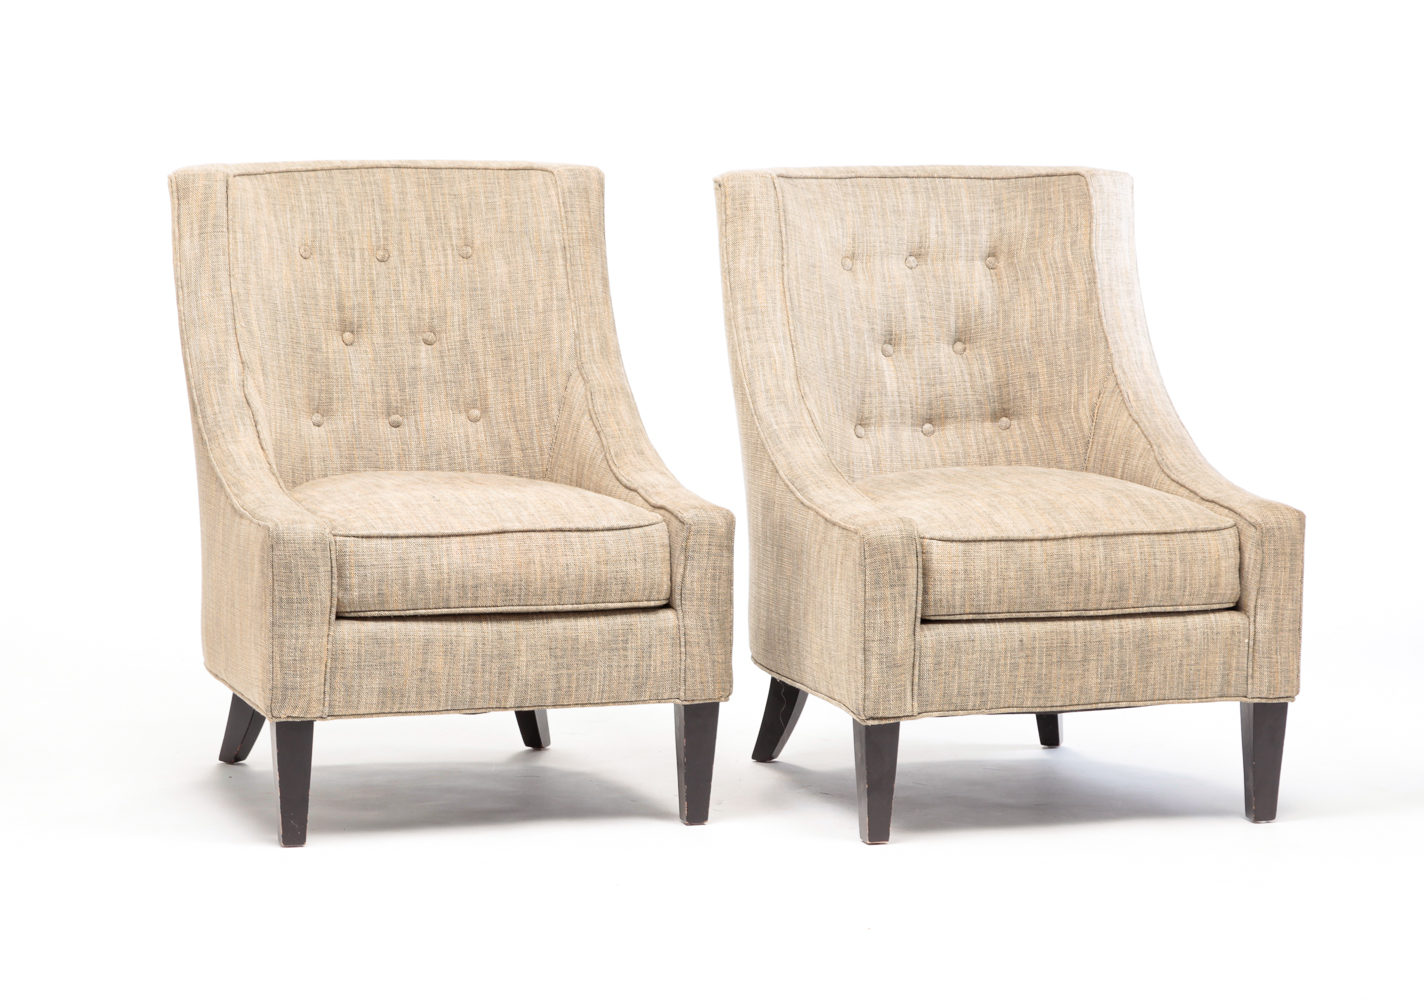 PAIR OF CONTEMPORARY CLUB CHAIRS.